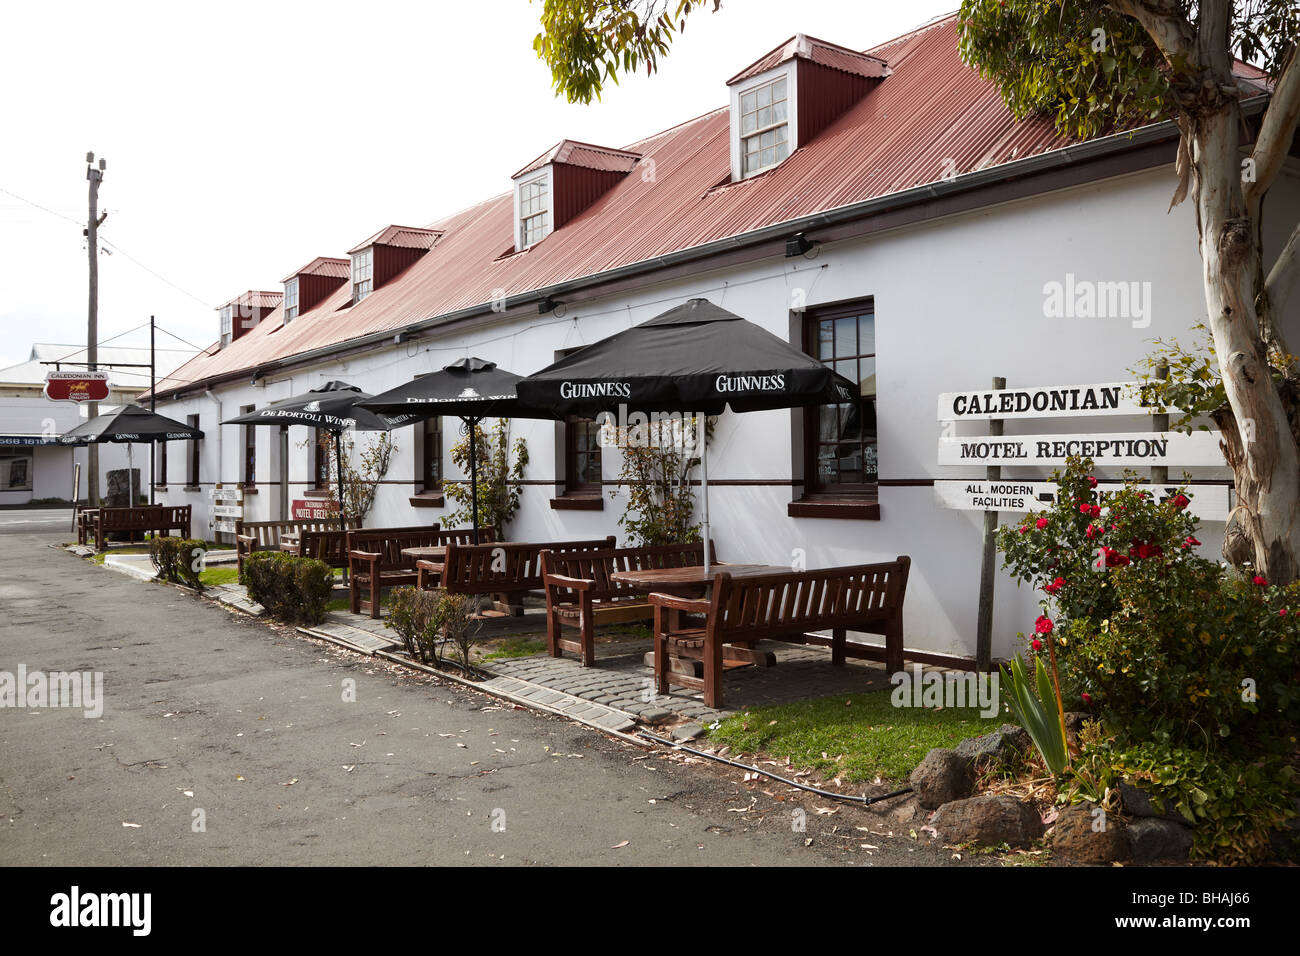 The Caledonian Inn (claimed to be the oldest continually licensed premises in Victoria), Port Fairy, Victoria,  Australia. Stock Photo